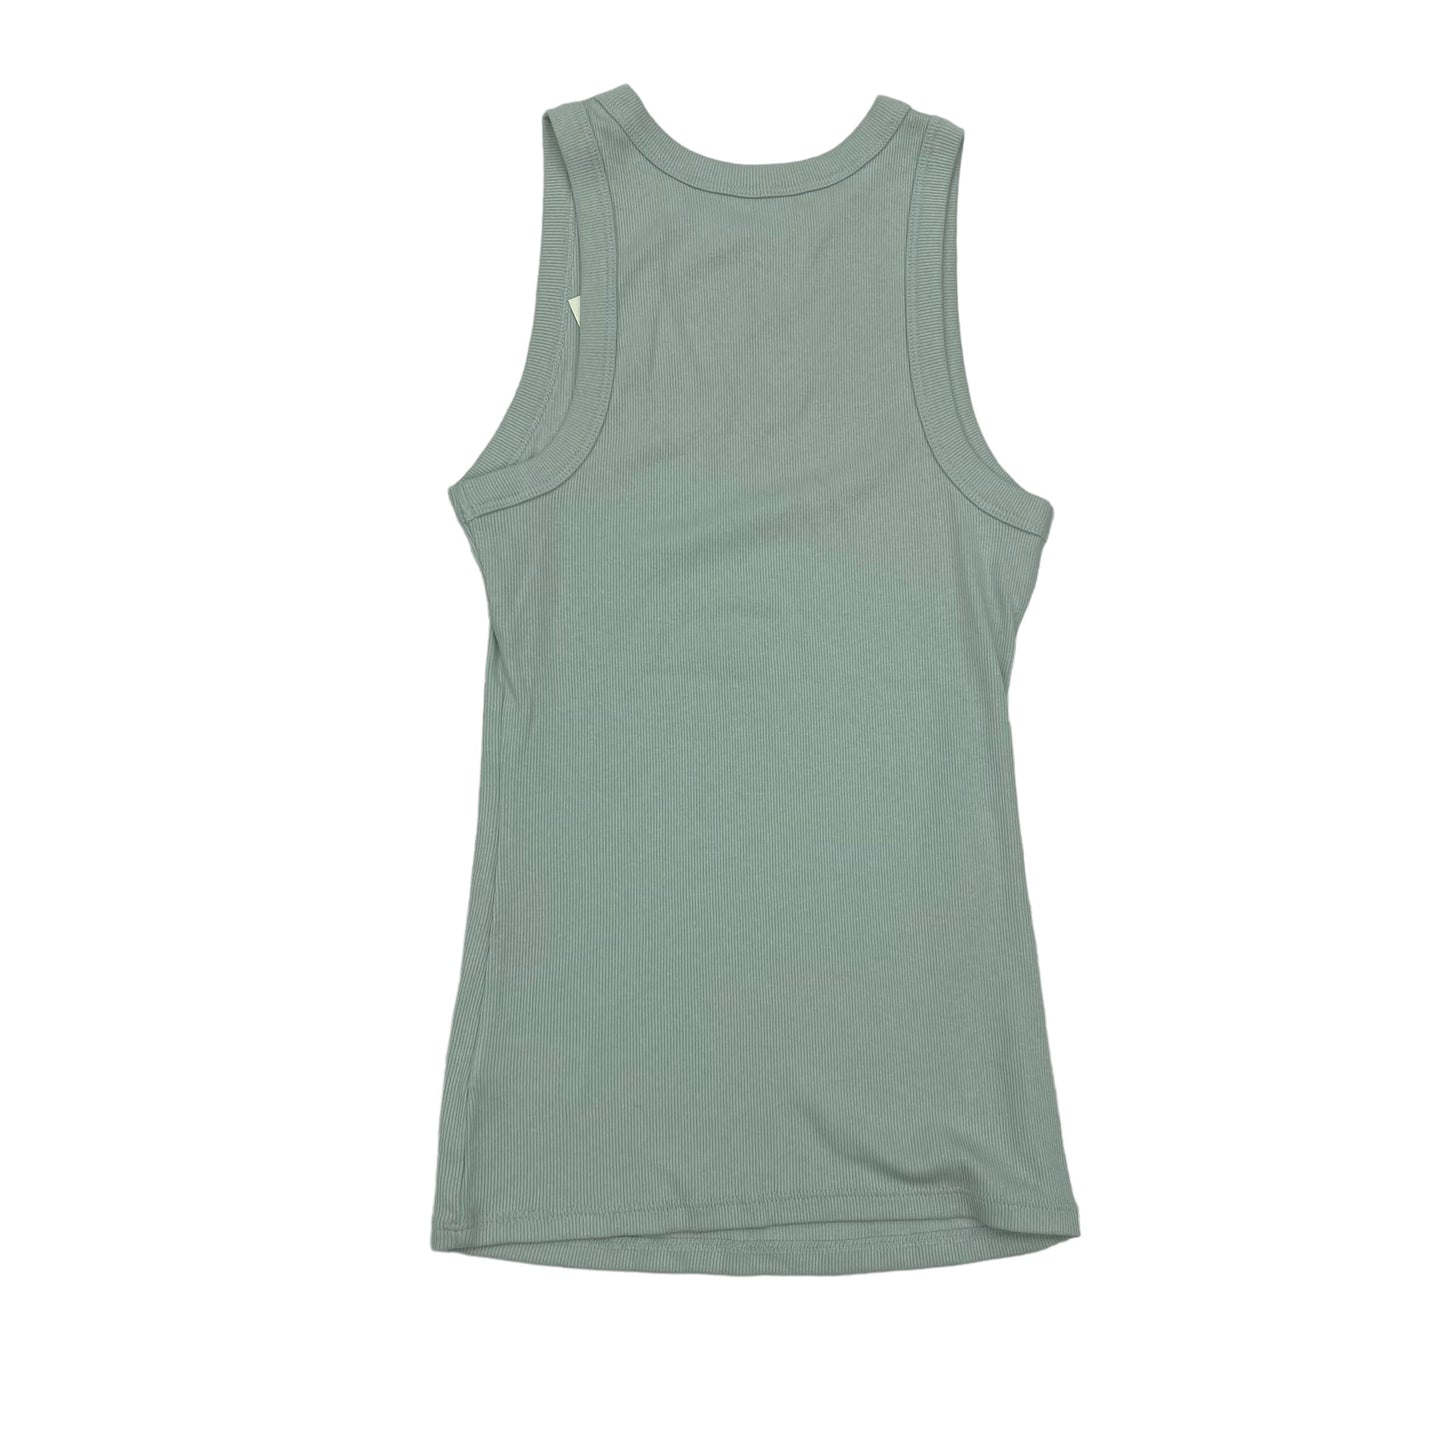 GREEN A NEW DAY TANK TOP, Size S